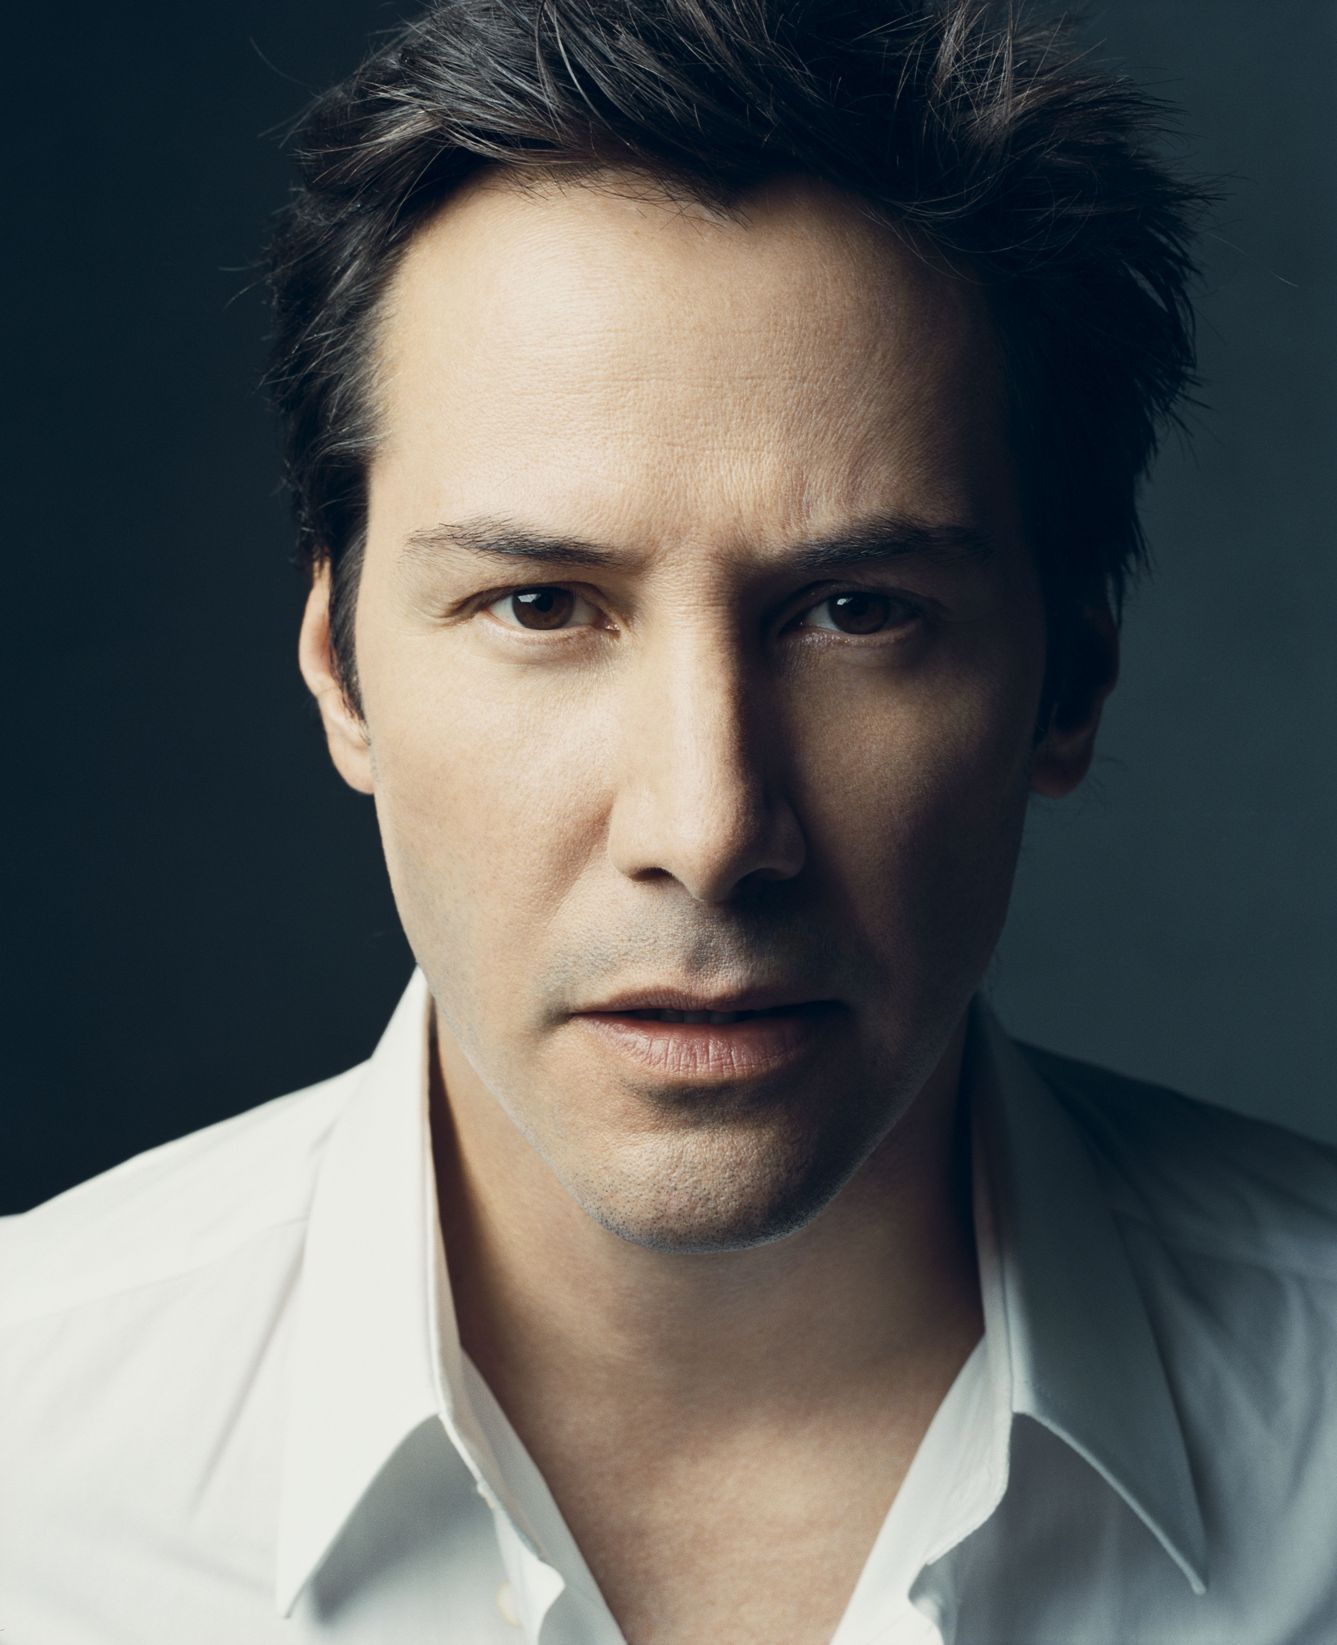 Keanu Reeves photo 95 of 299 pics, wallpaper - photo #176497 - ThePlace2